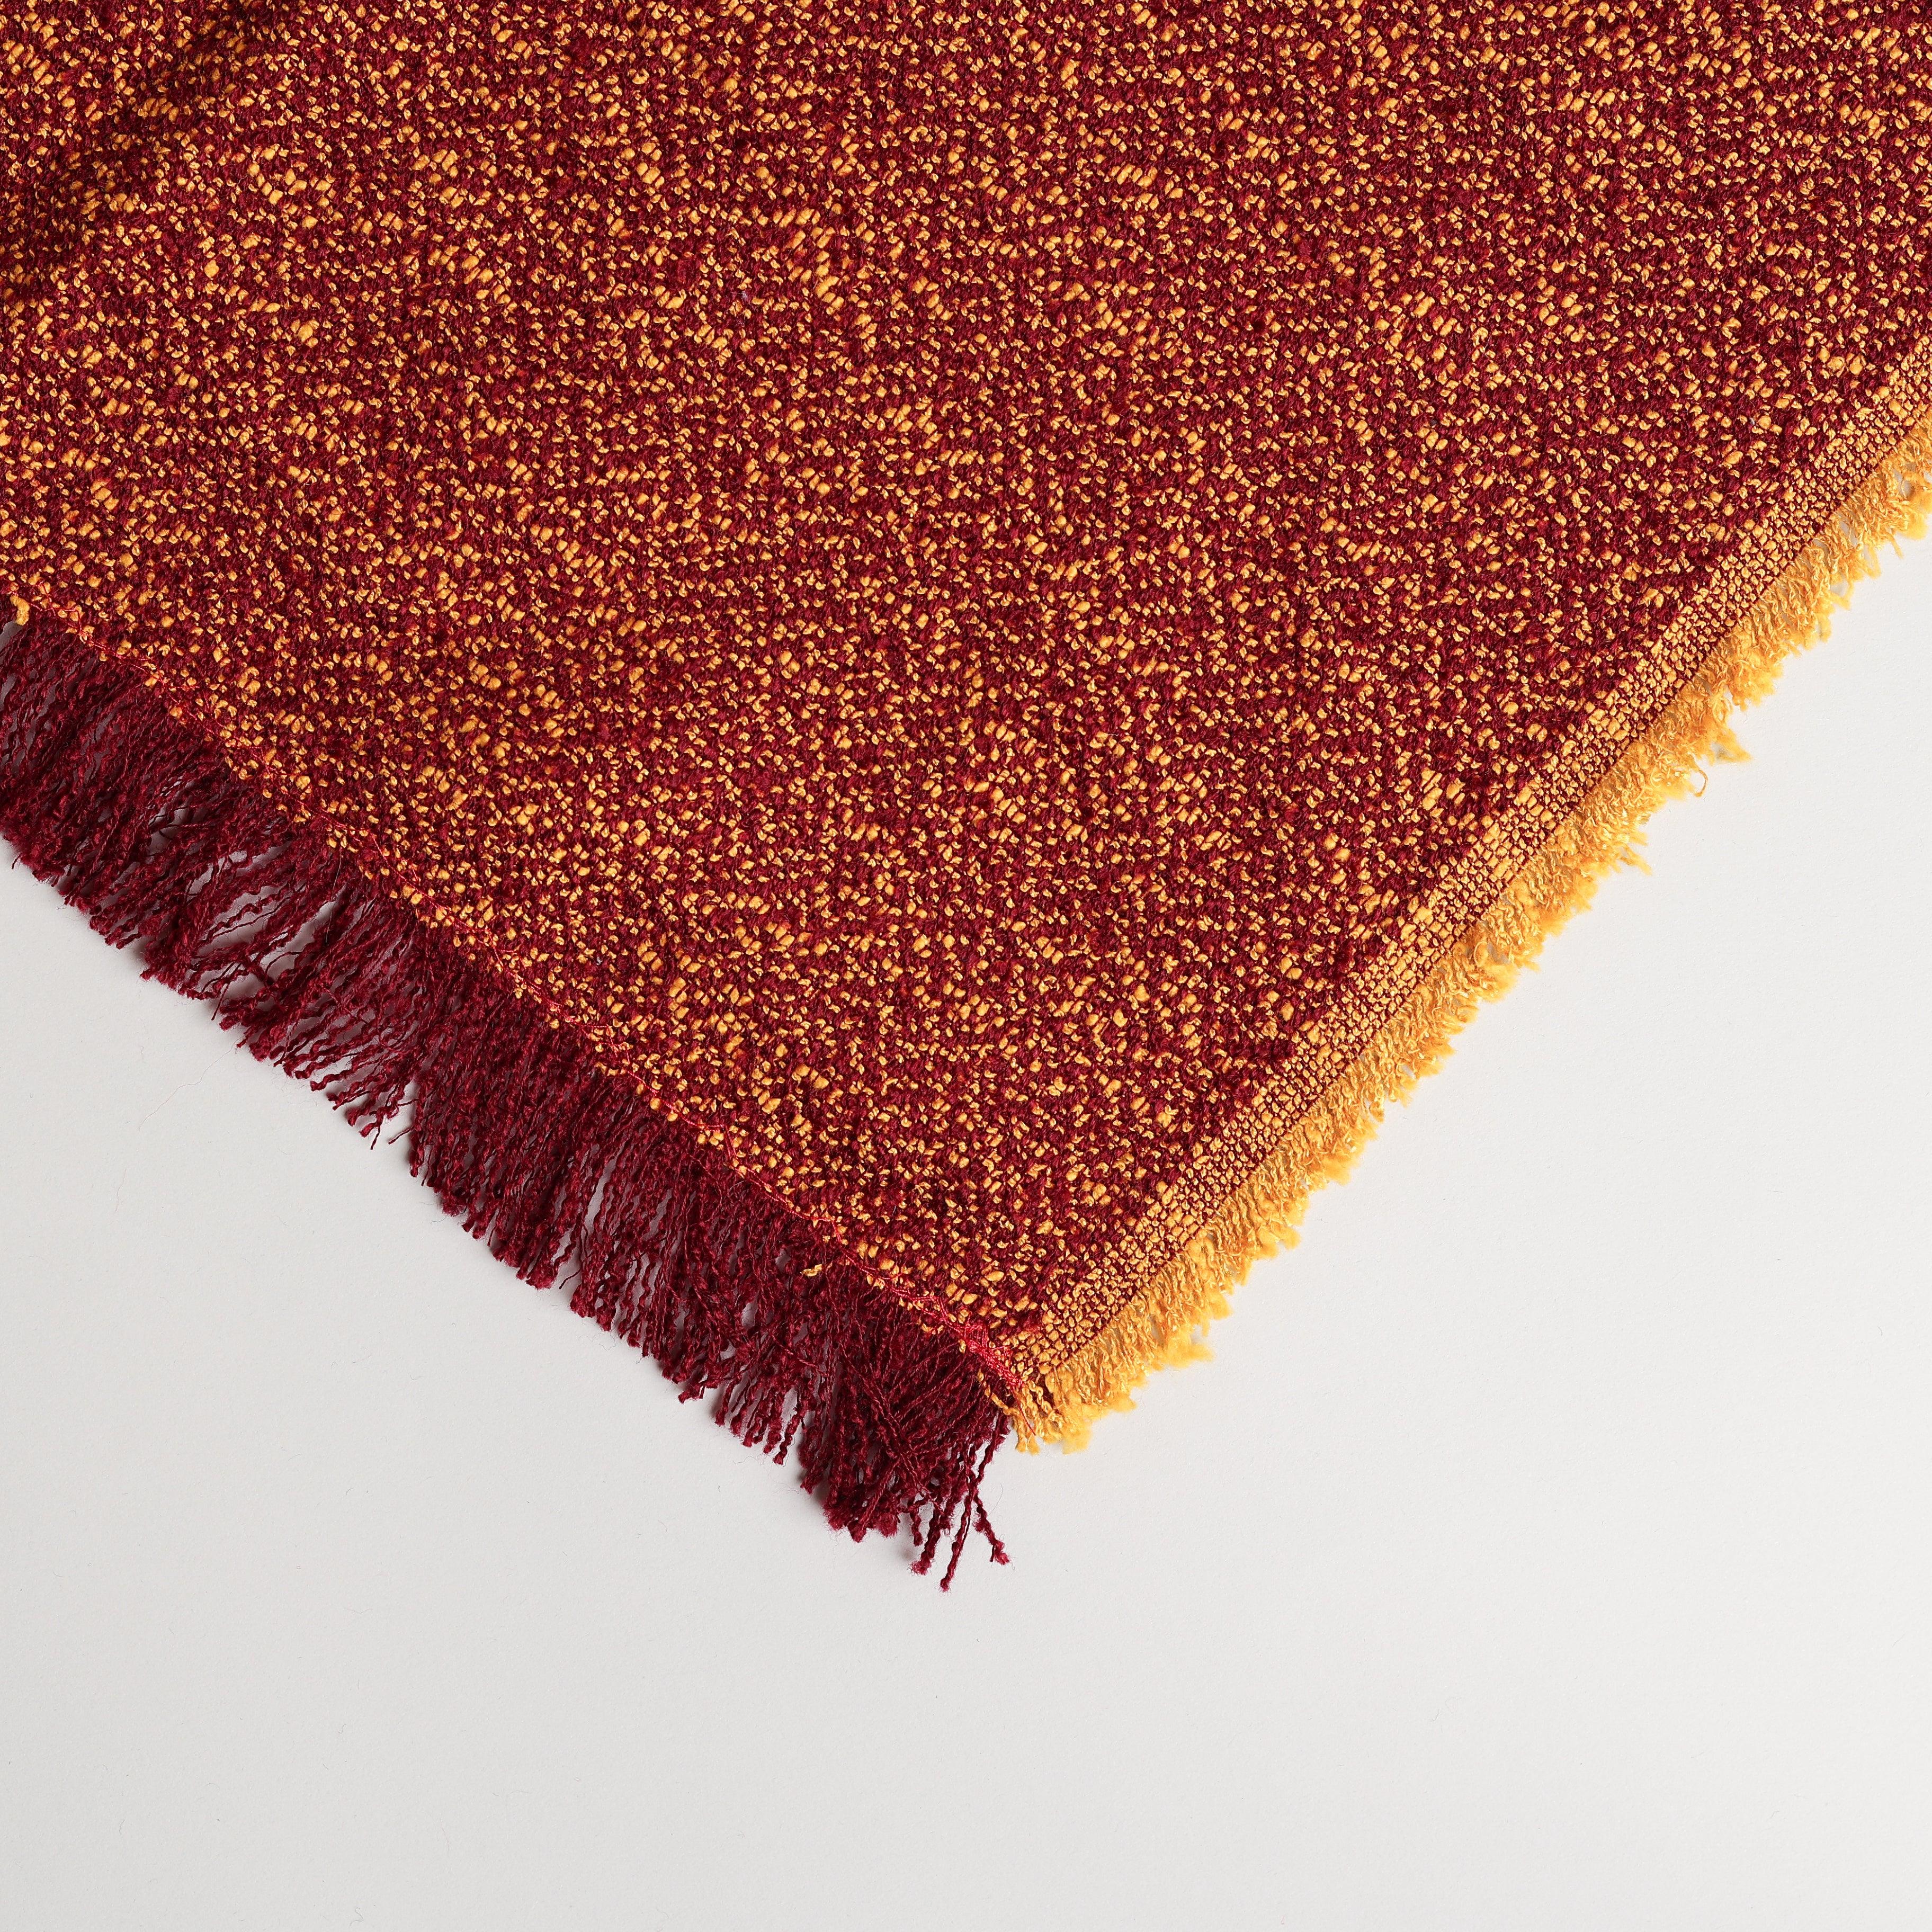 SOFT TEXTURED BOUCLE TWEED THROWS - Boucle Home